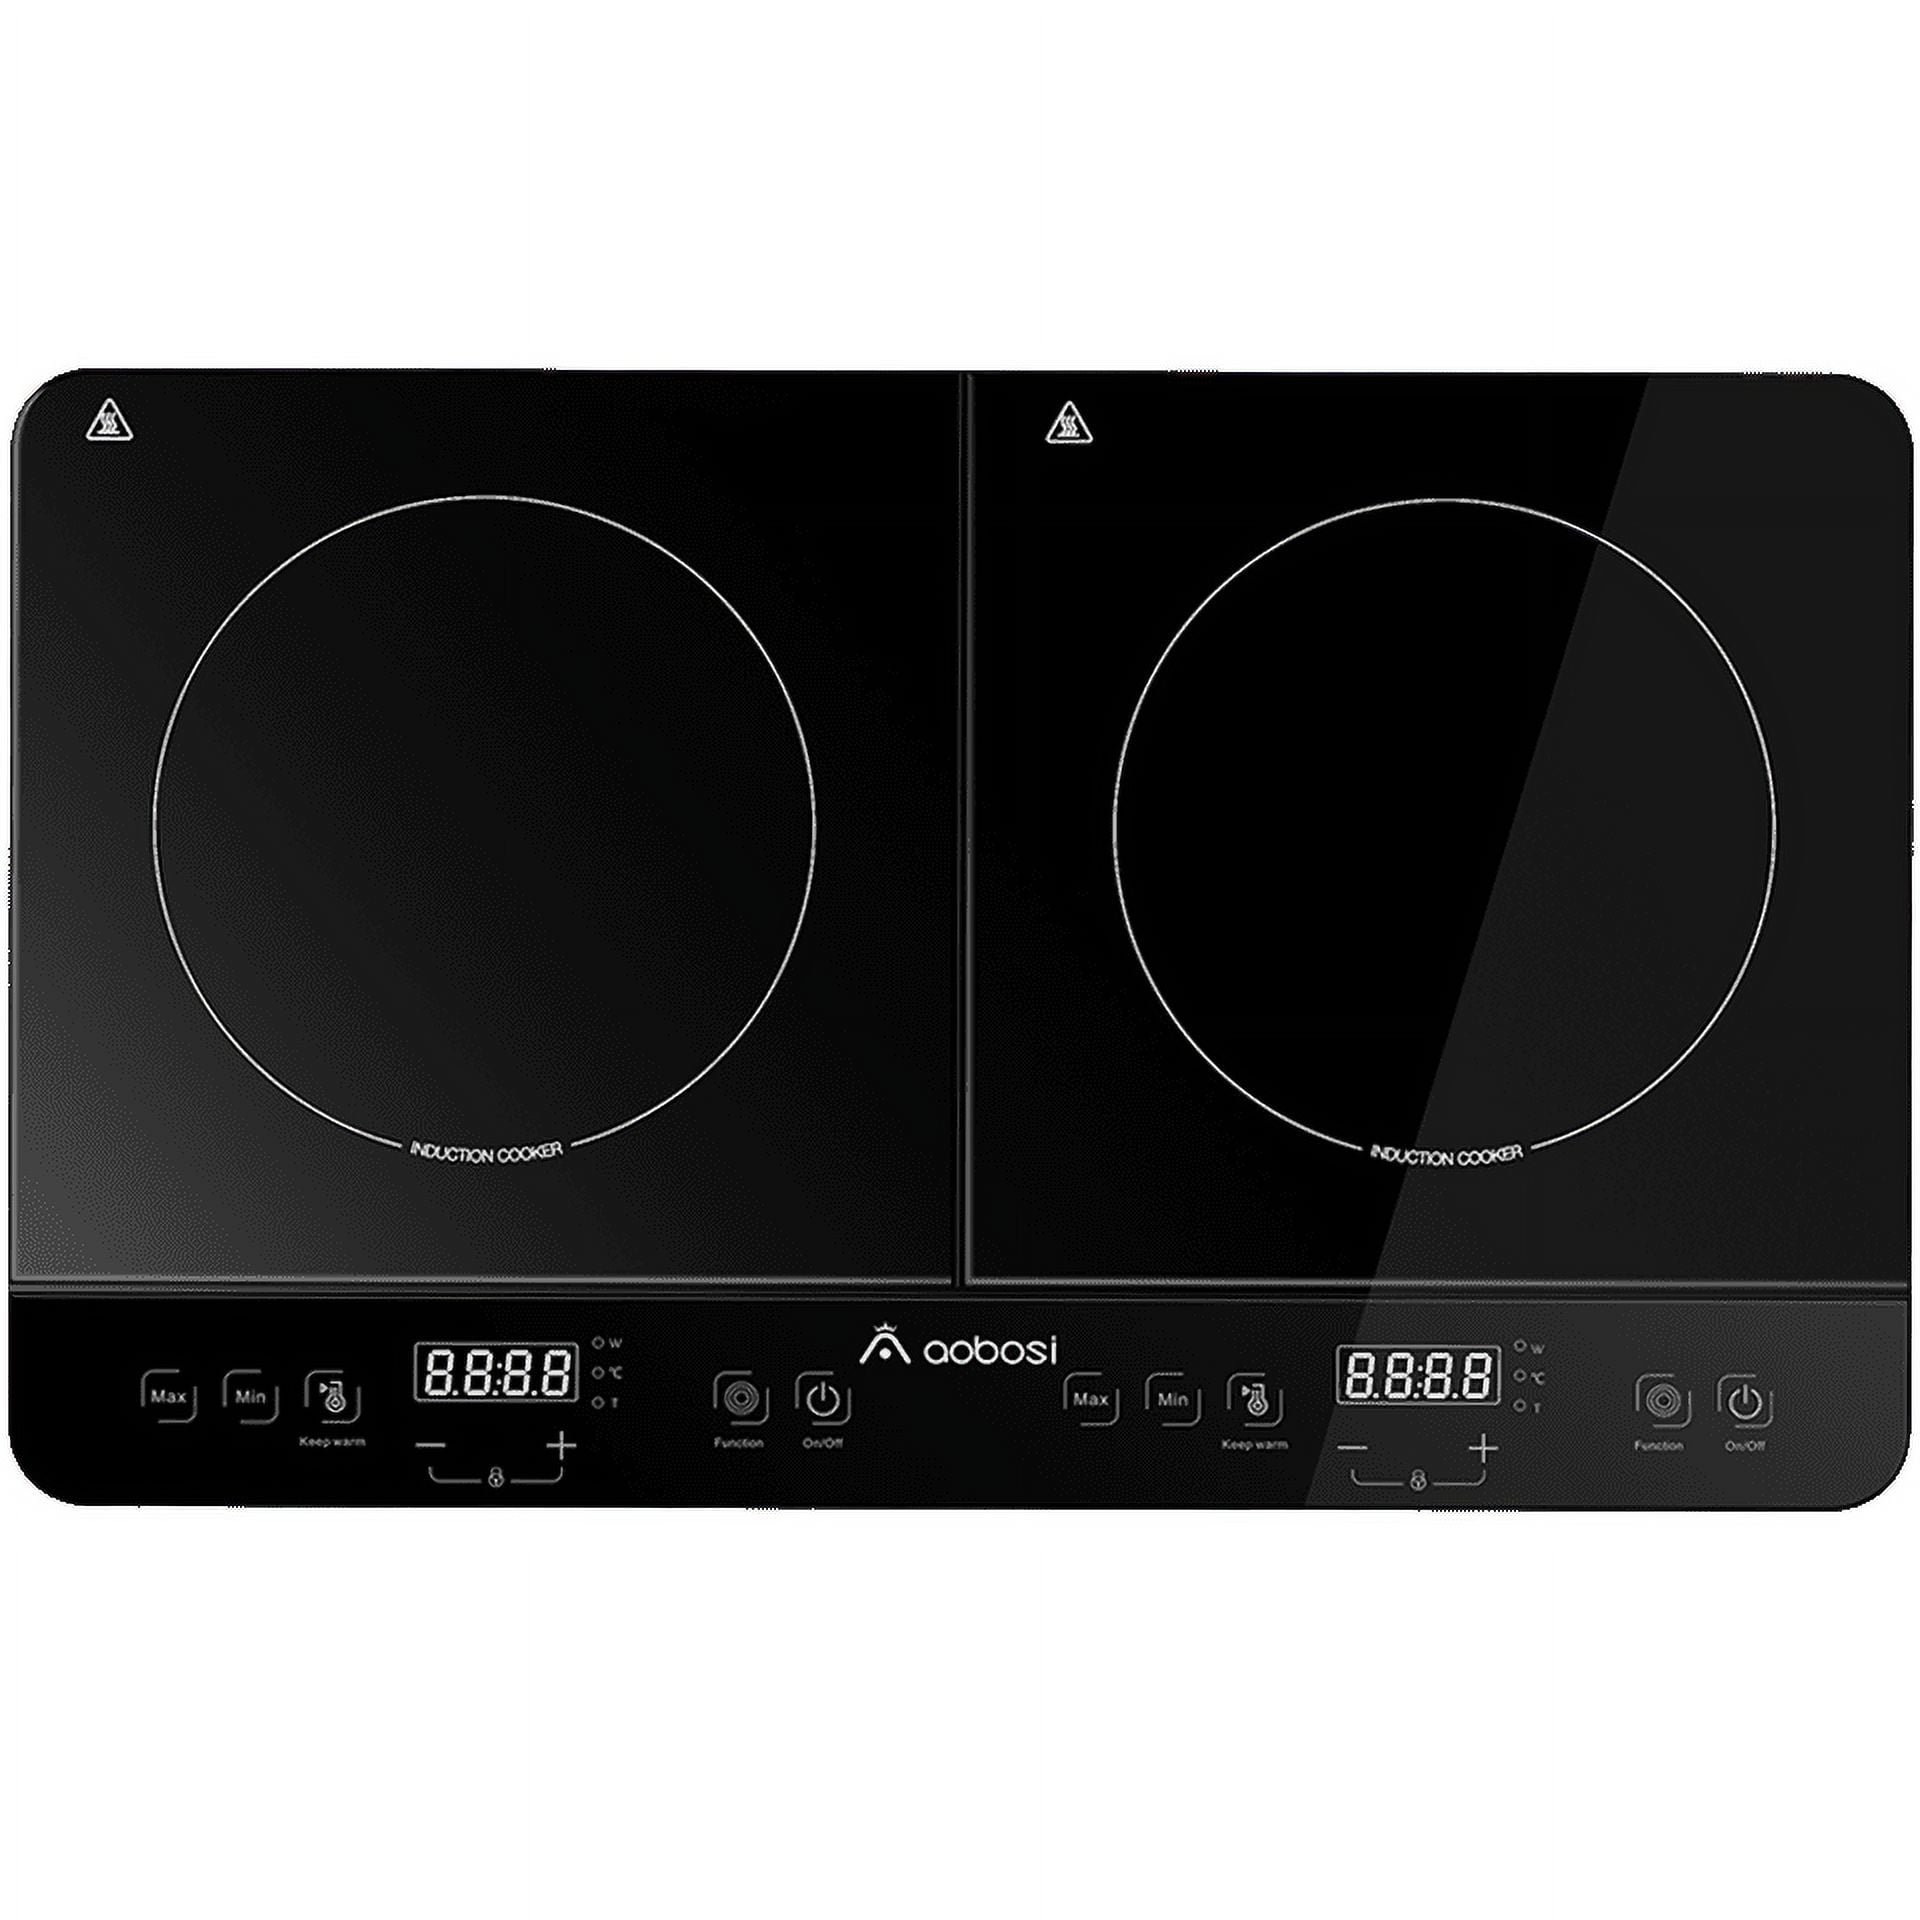 Double Induction Cooktop AMZCHEF Induction Stove Top 2 Burners for RV,  Built-in Electric Cooktops With 9 Power Levels, Sensor Touch, 99-min Timer